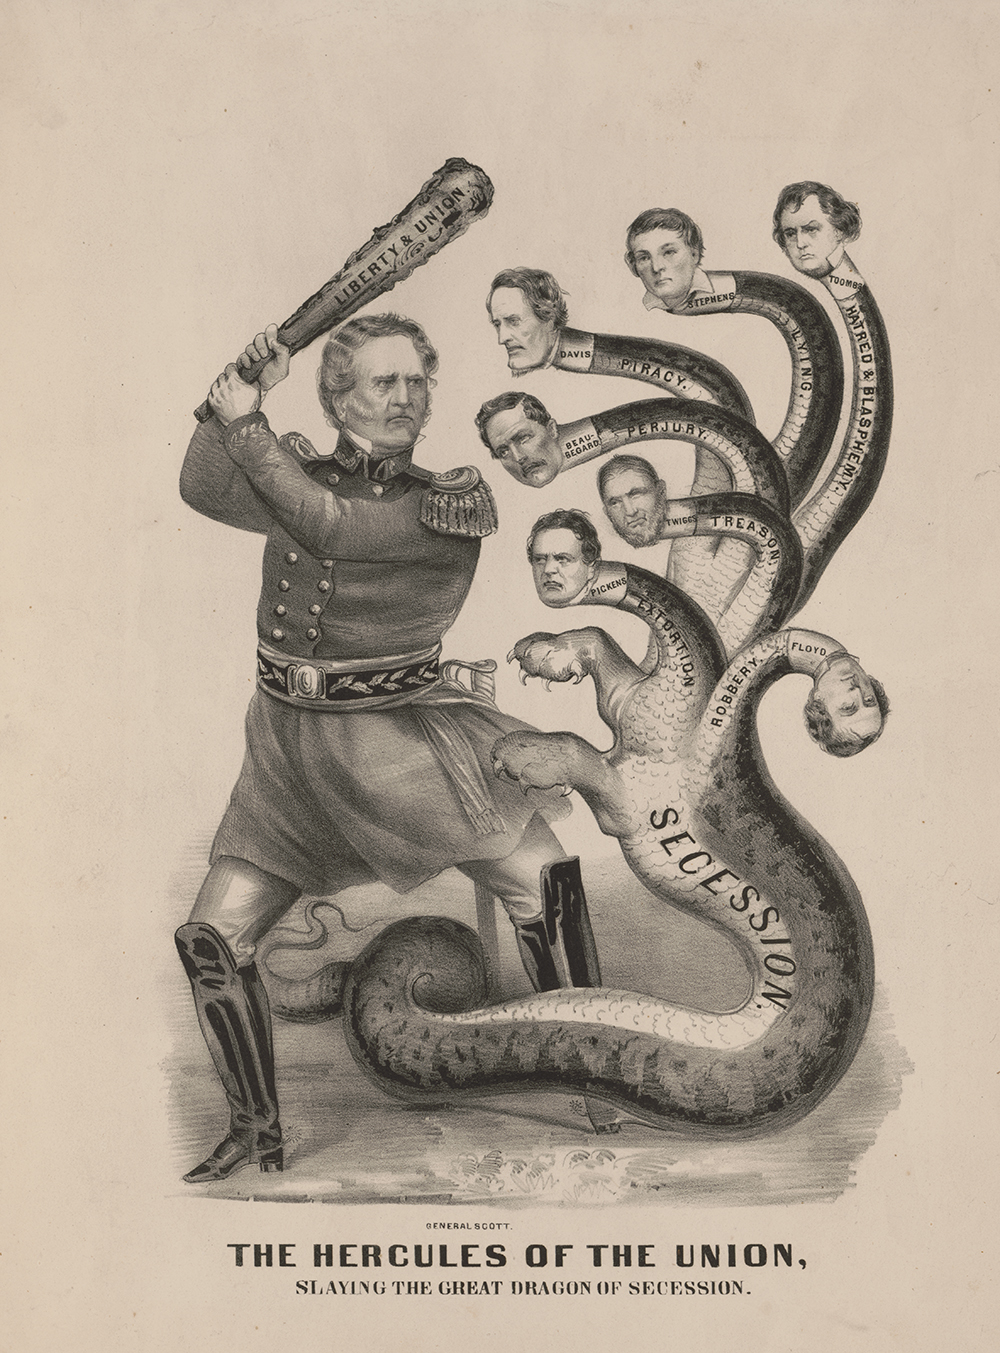 The Hercules of the Union, Slaying the Great Dragon of Secession, by Currier & Ives, 1861. Library of Congress, Prints and Photographs Division.